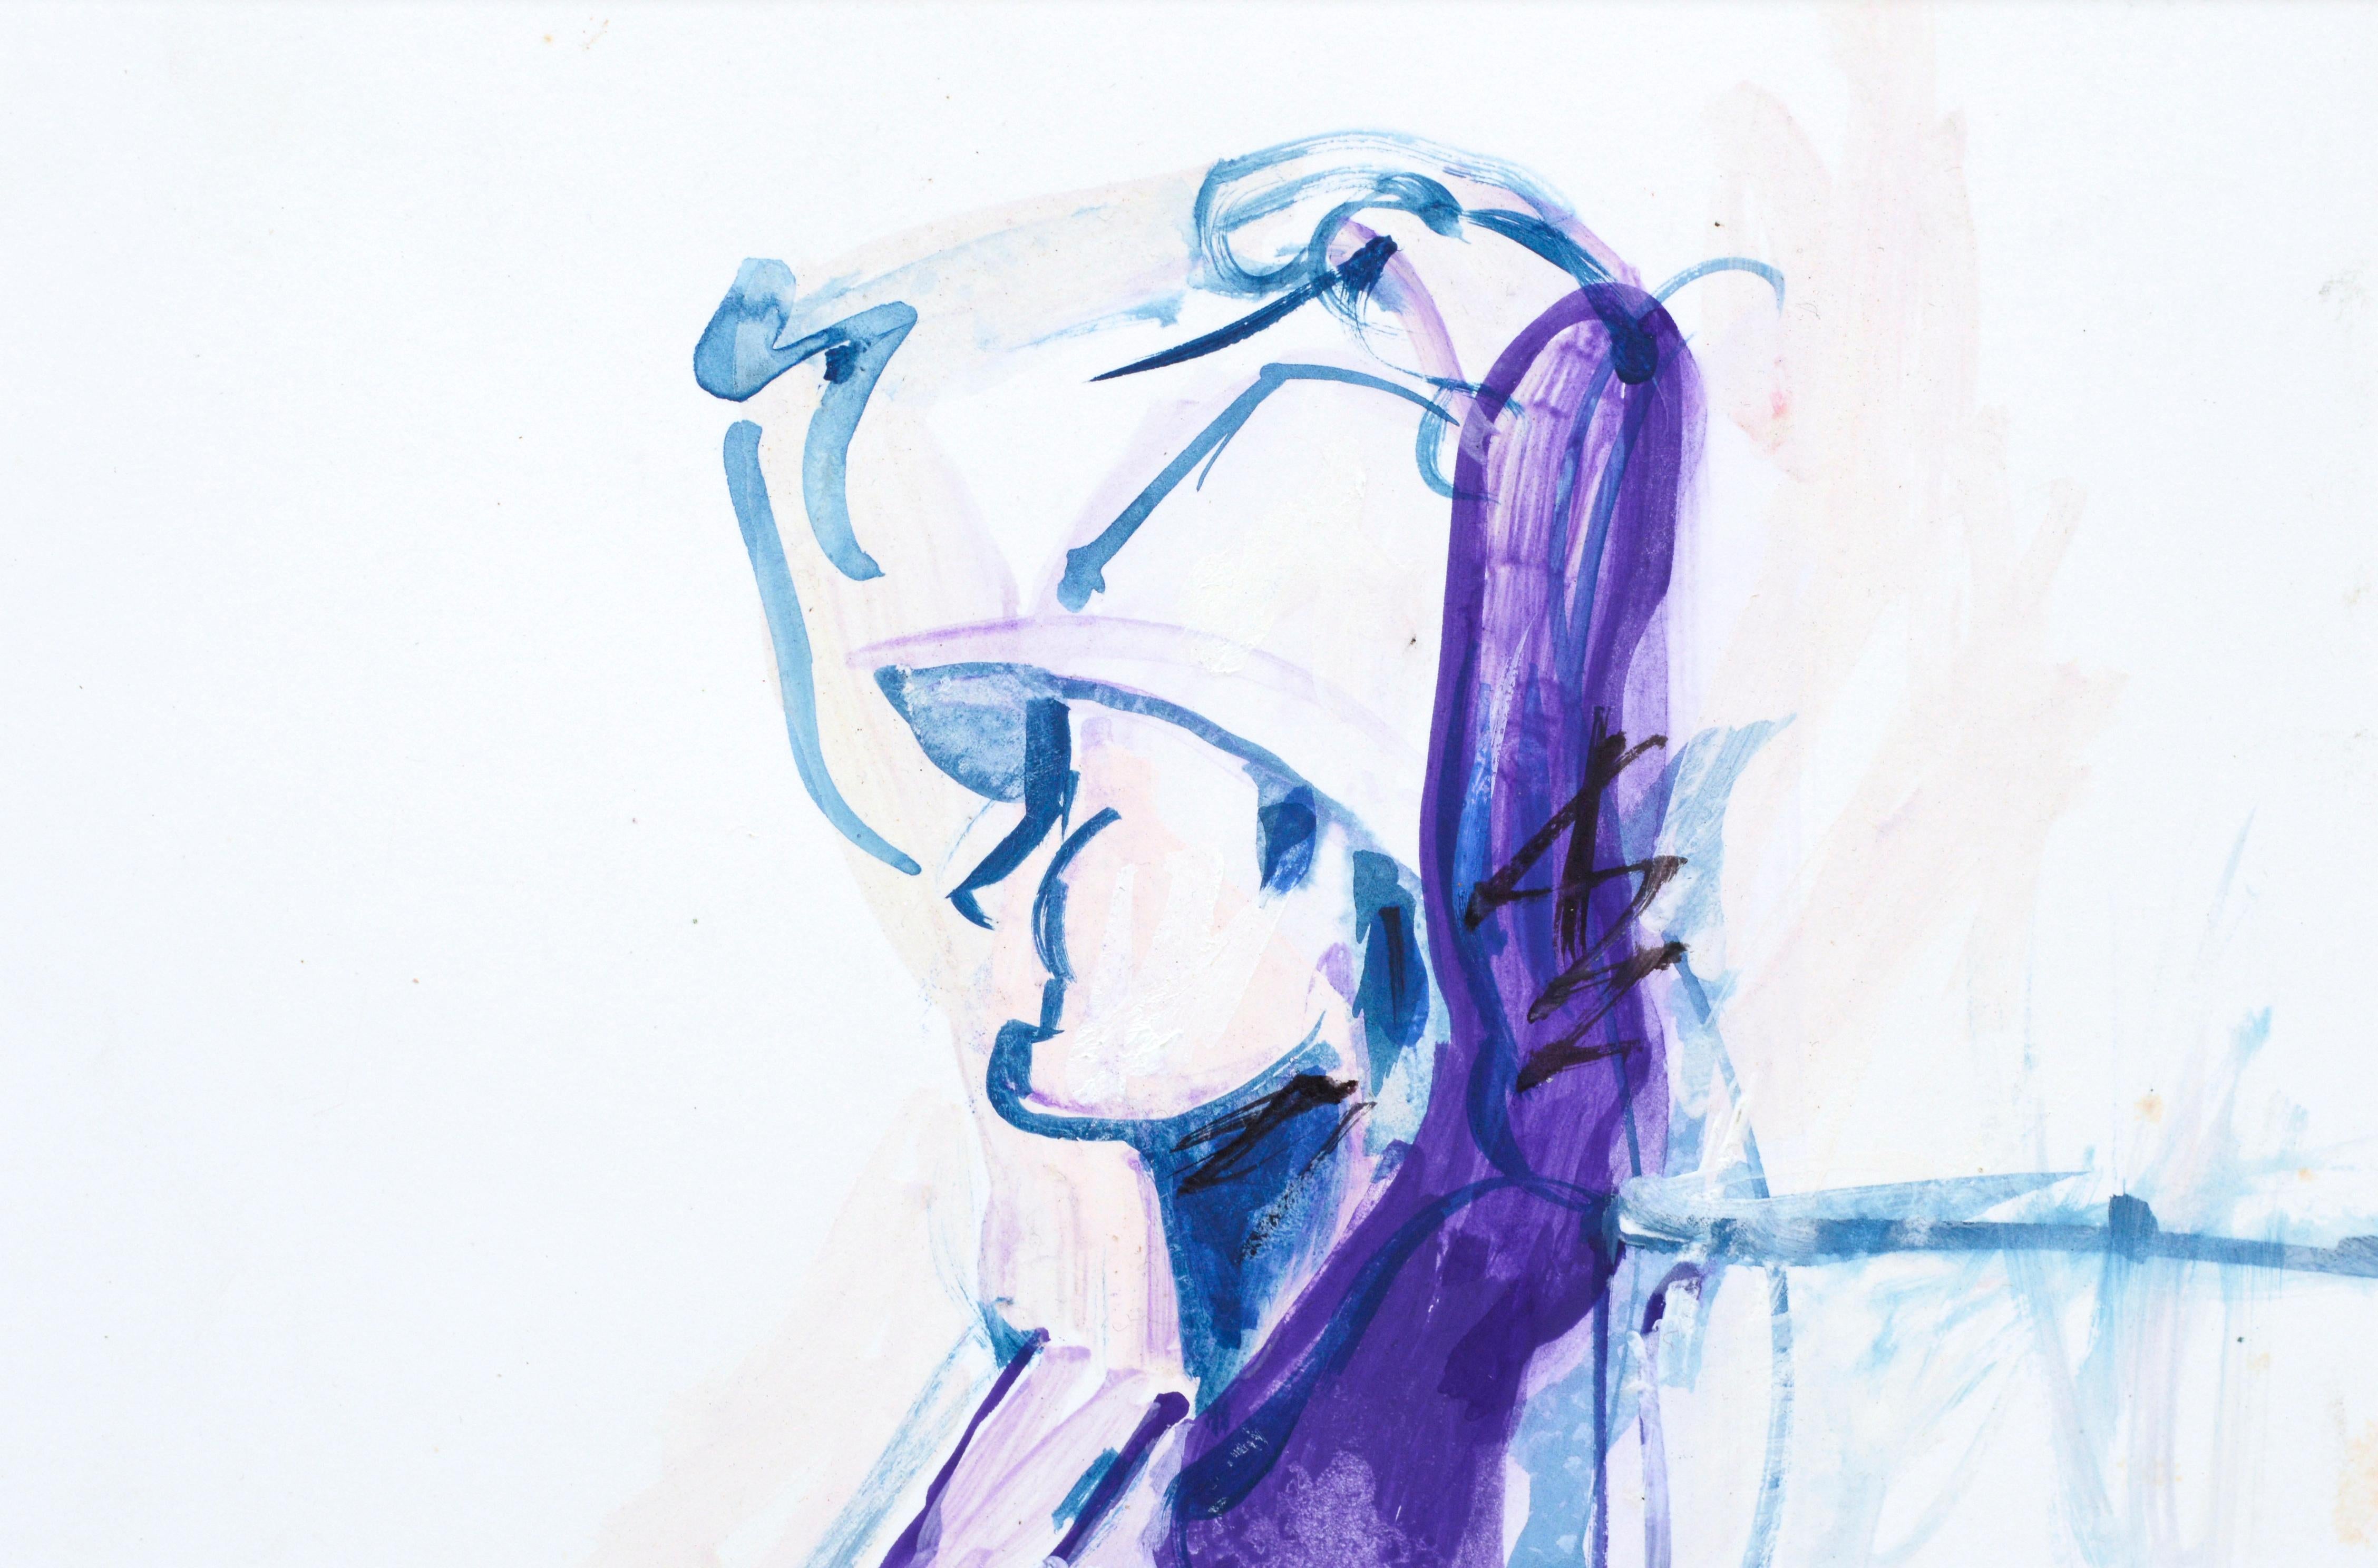 Abstracted Female Figure in Purple  - Fauvist Painting by Michael William Eggleston